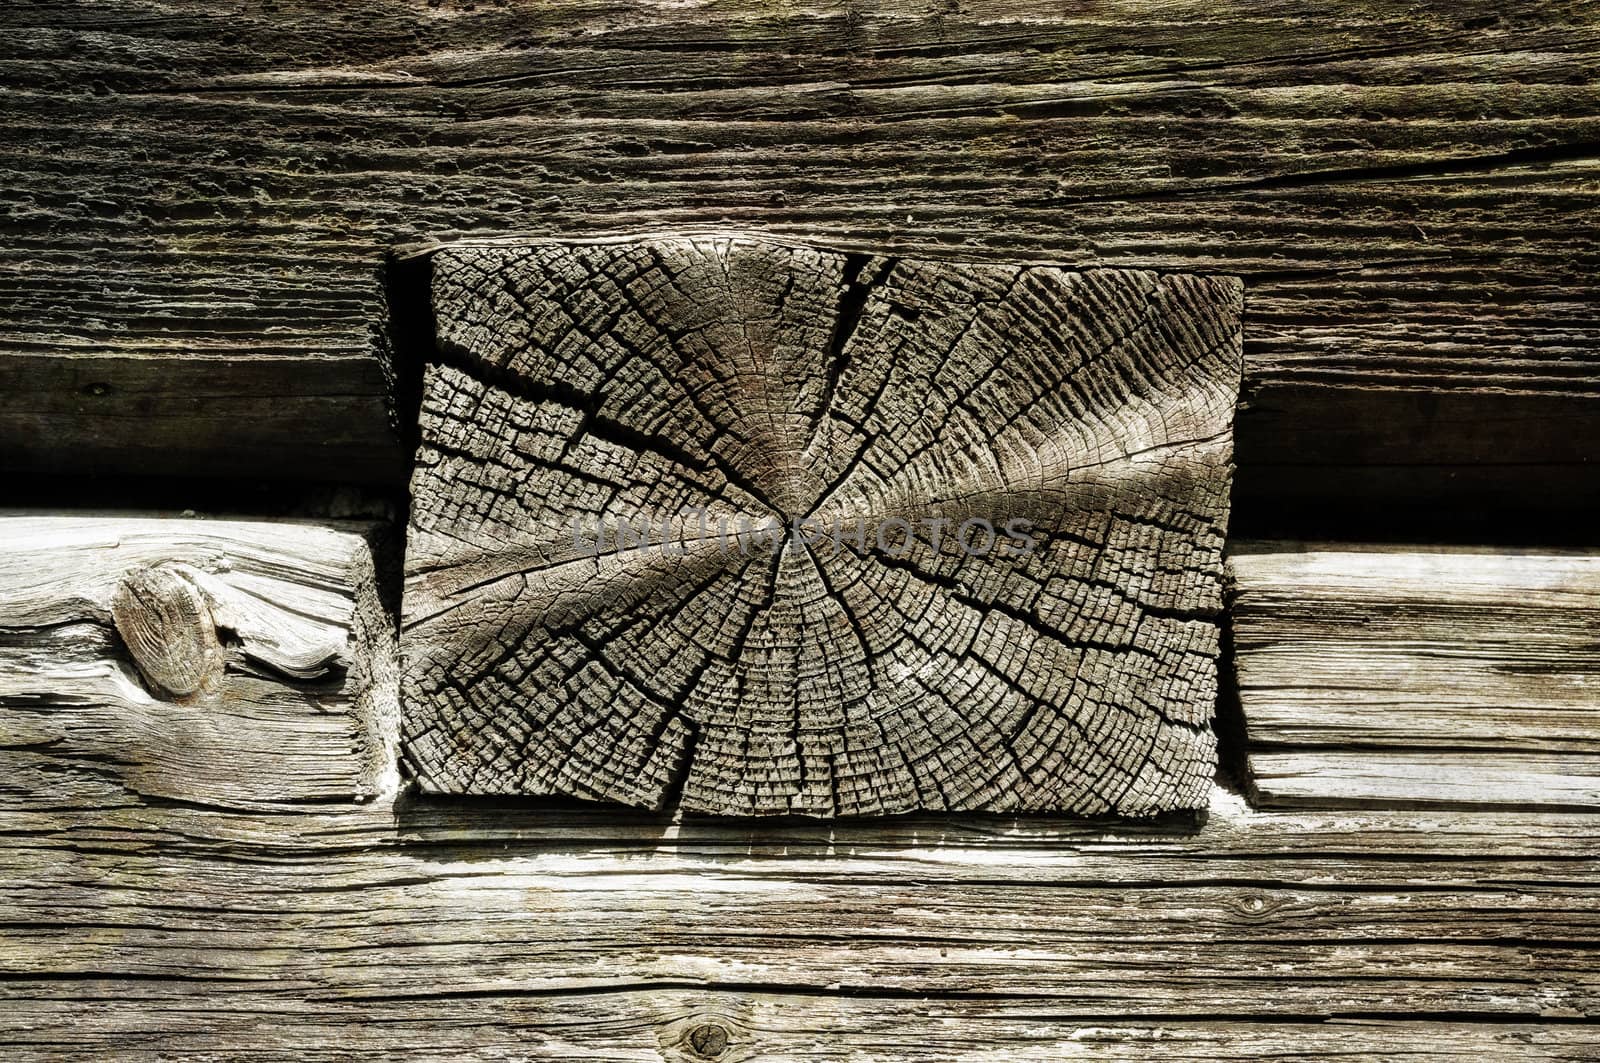 Wooden wall detail, structured old textured wood